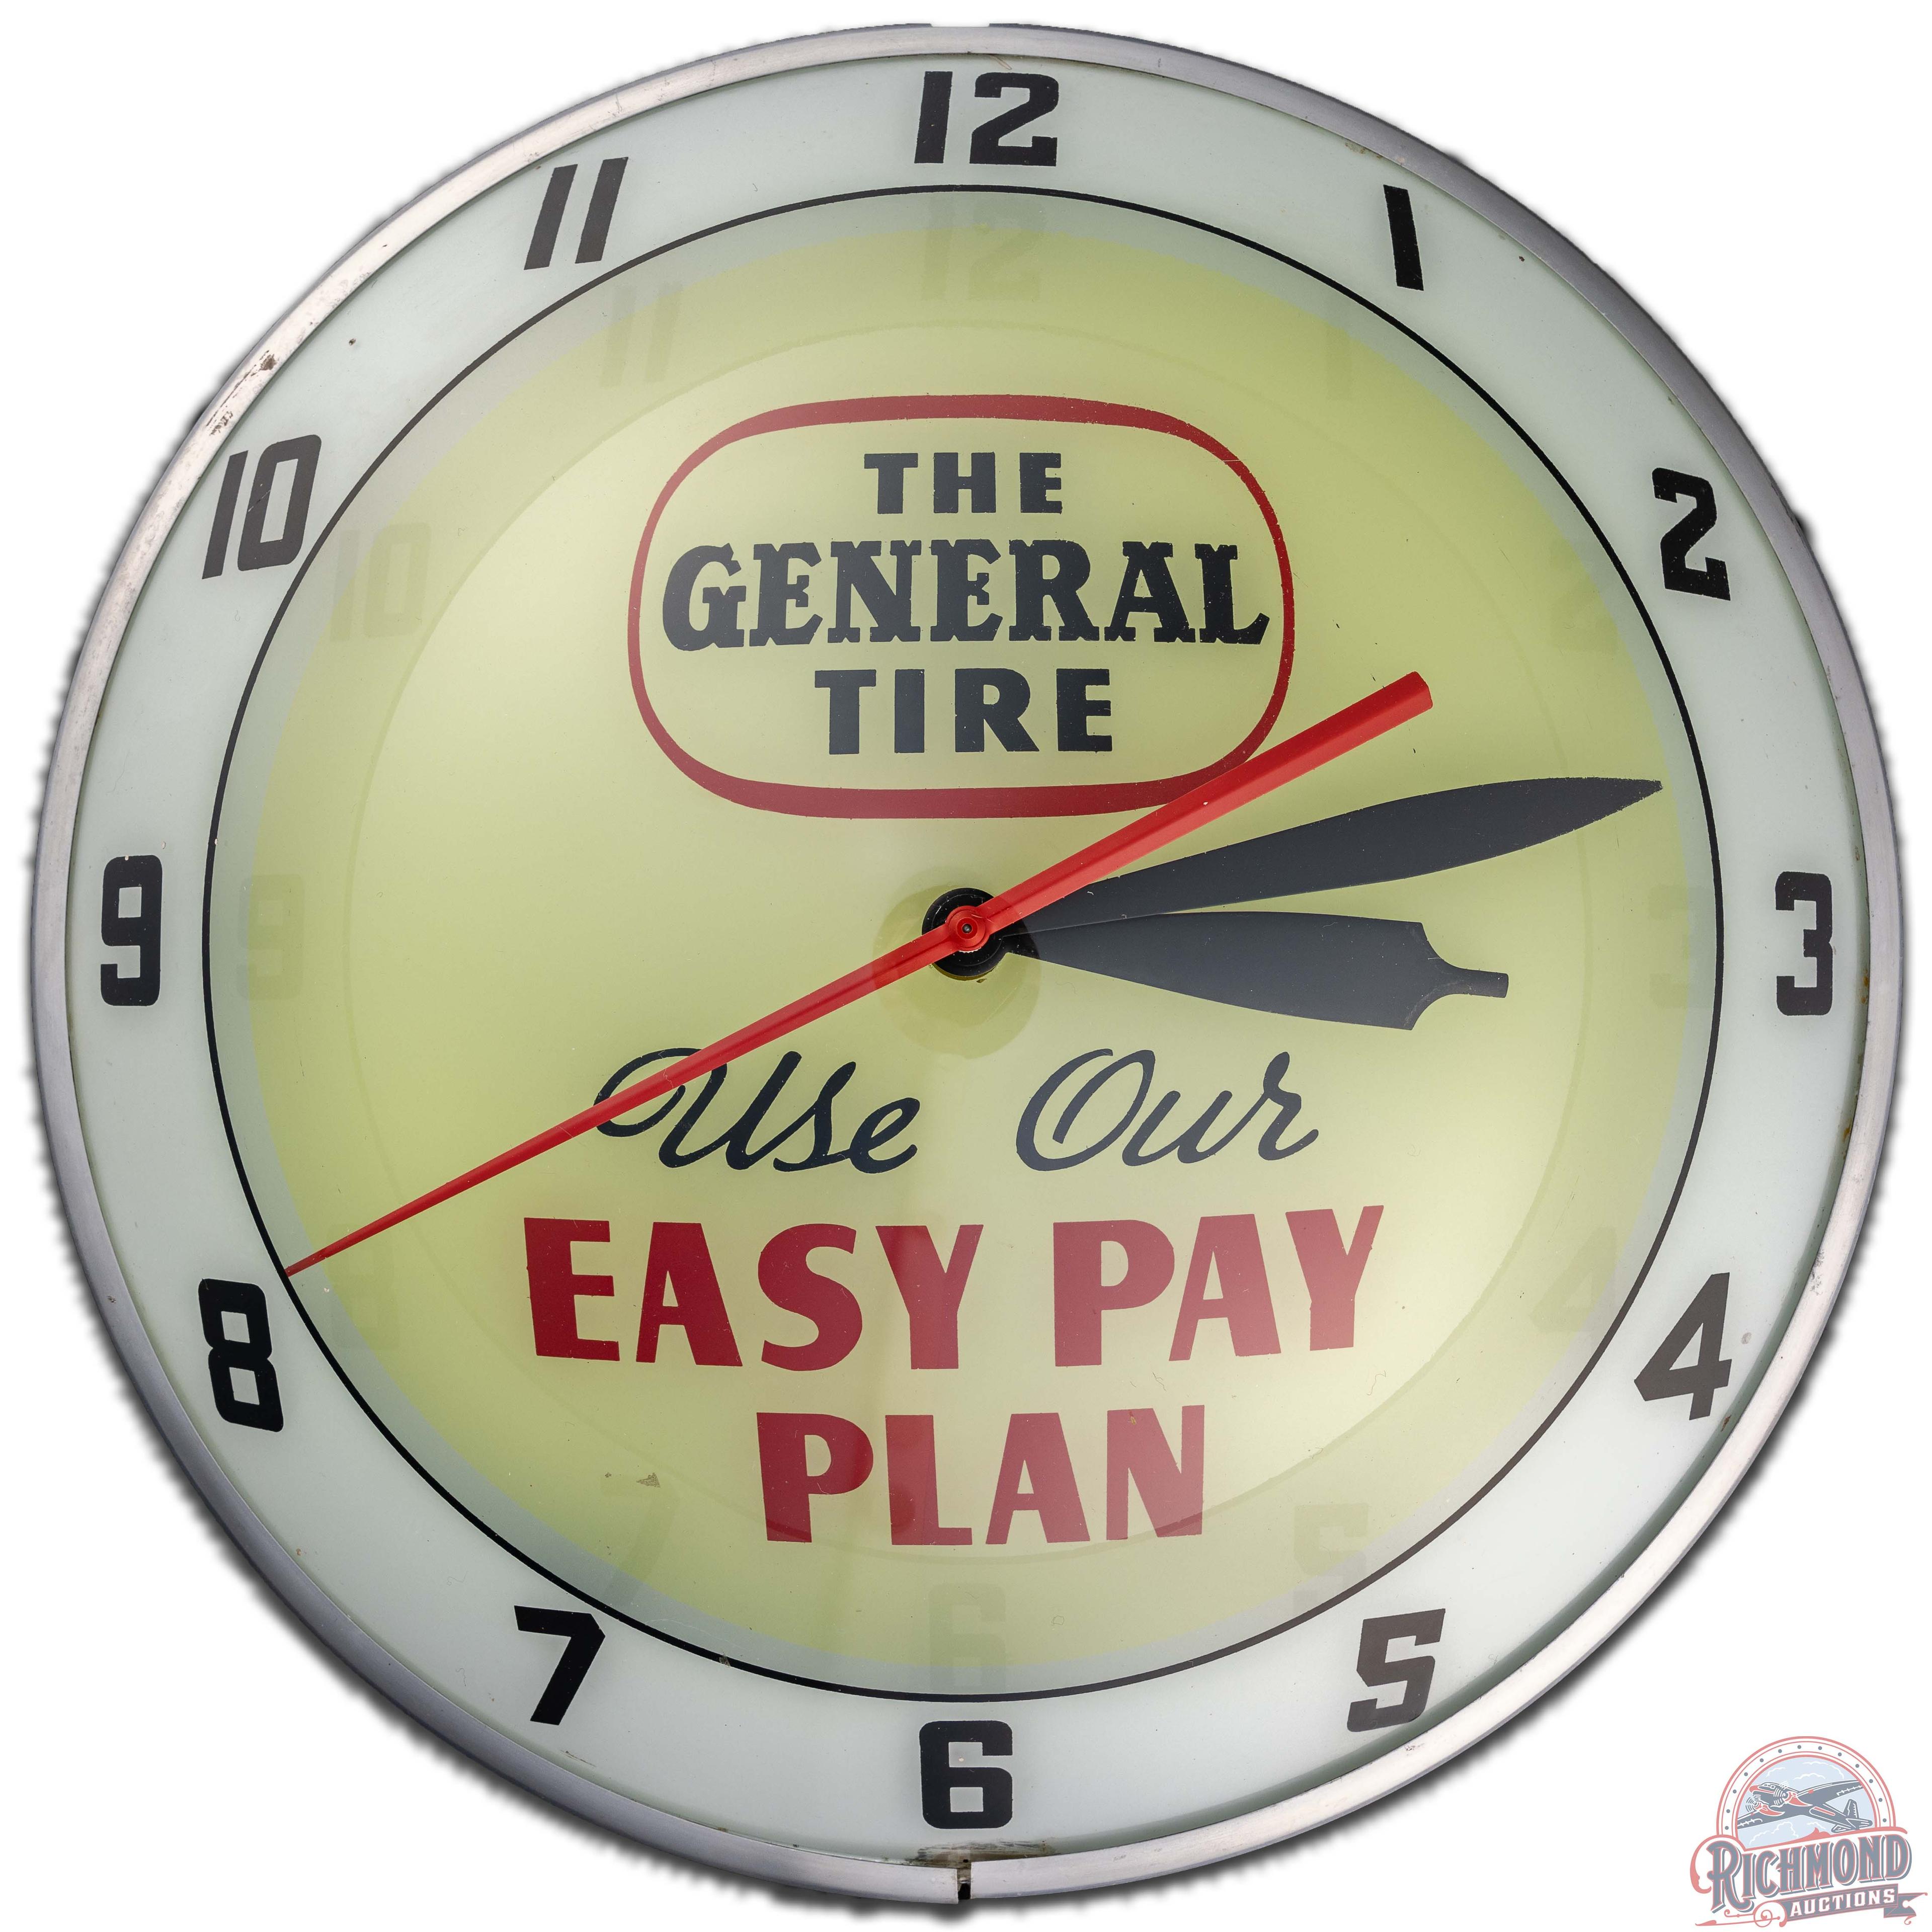 General Tires Use Our Easy Pay Plan 15" Double Bubble Advertising Clock